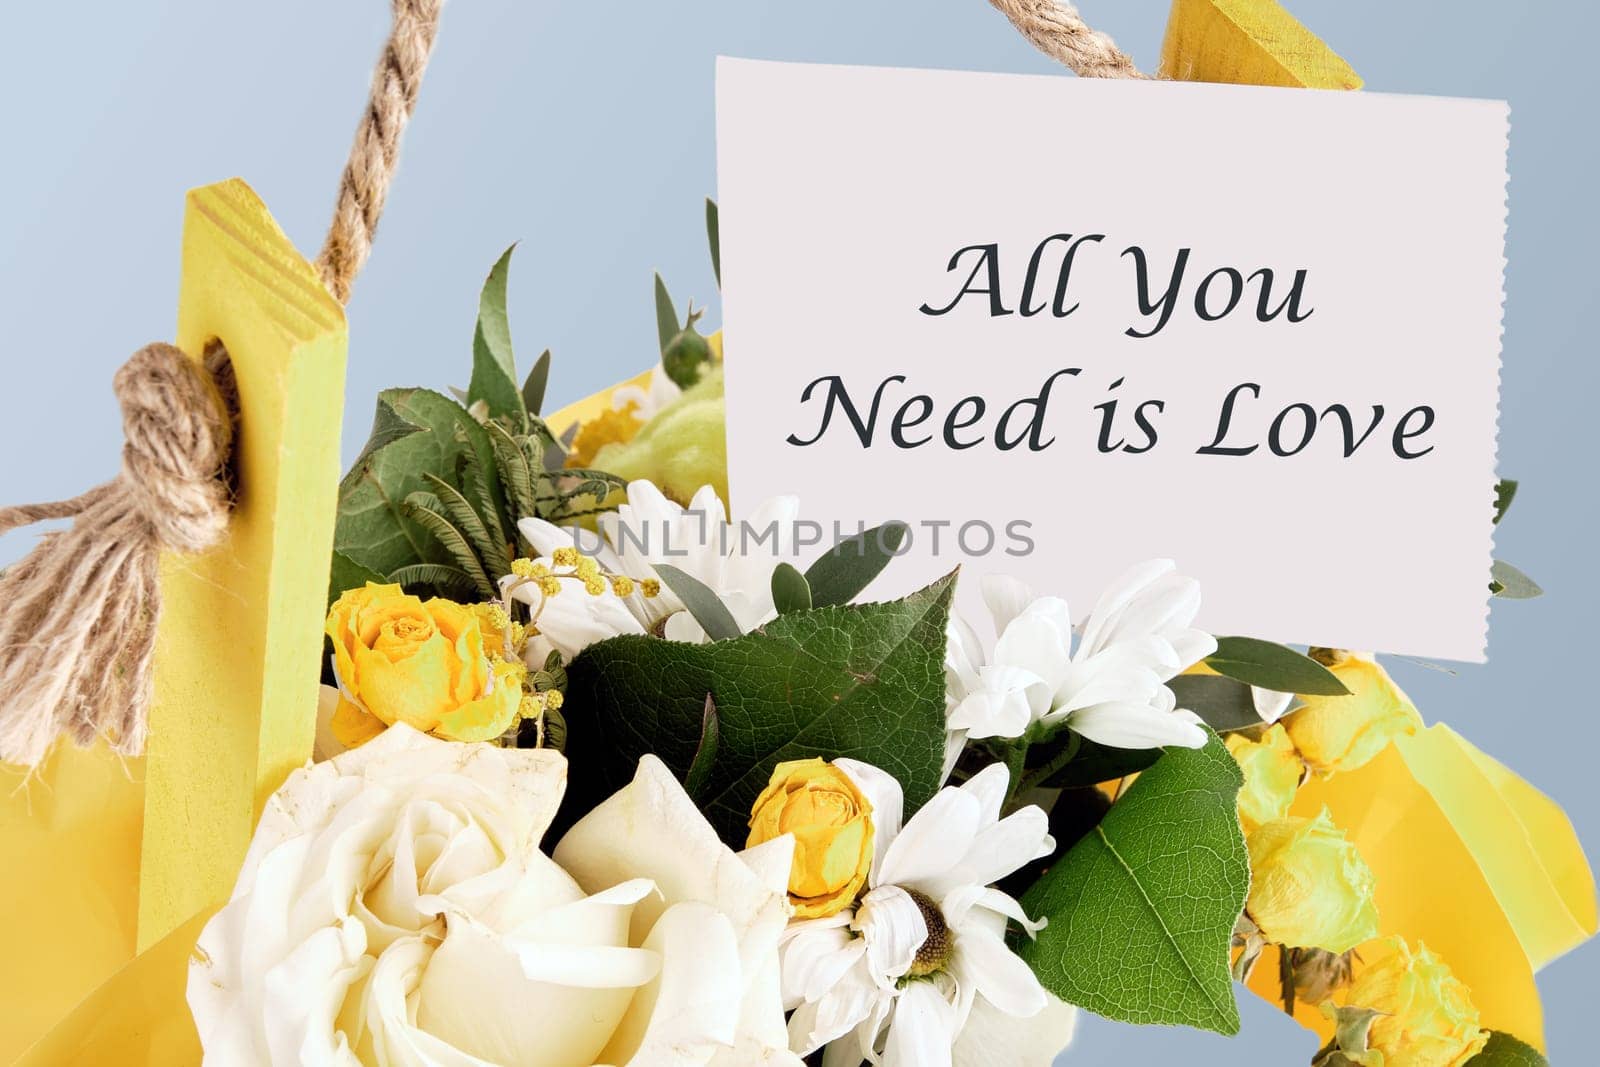 All you need is love slogan written on paper in a basket with flowers.The concept of gifts and celebrations